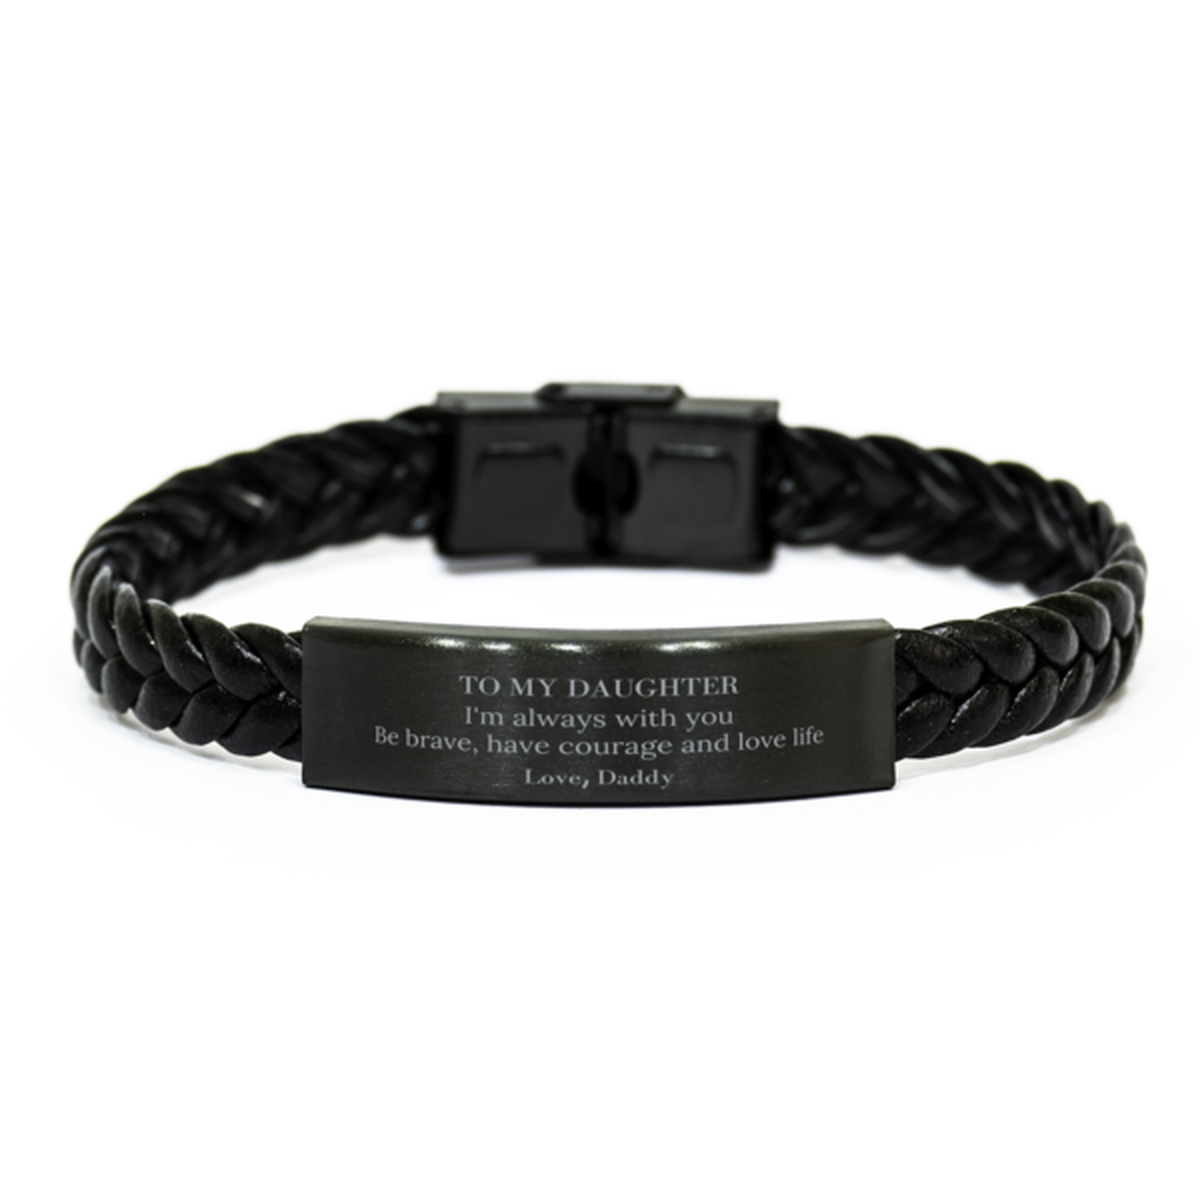 To My Daughter Gifts from Daddy, Unique Braided Leather Bracelet Inspirational Christmas Birthday Graduation Gifts for Daughter I'm always with you. Be brave, have courage and love life. Love, Daddy